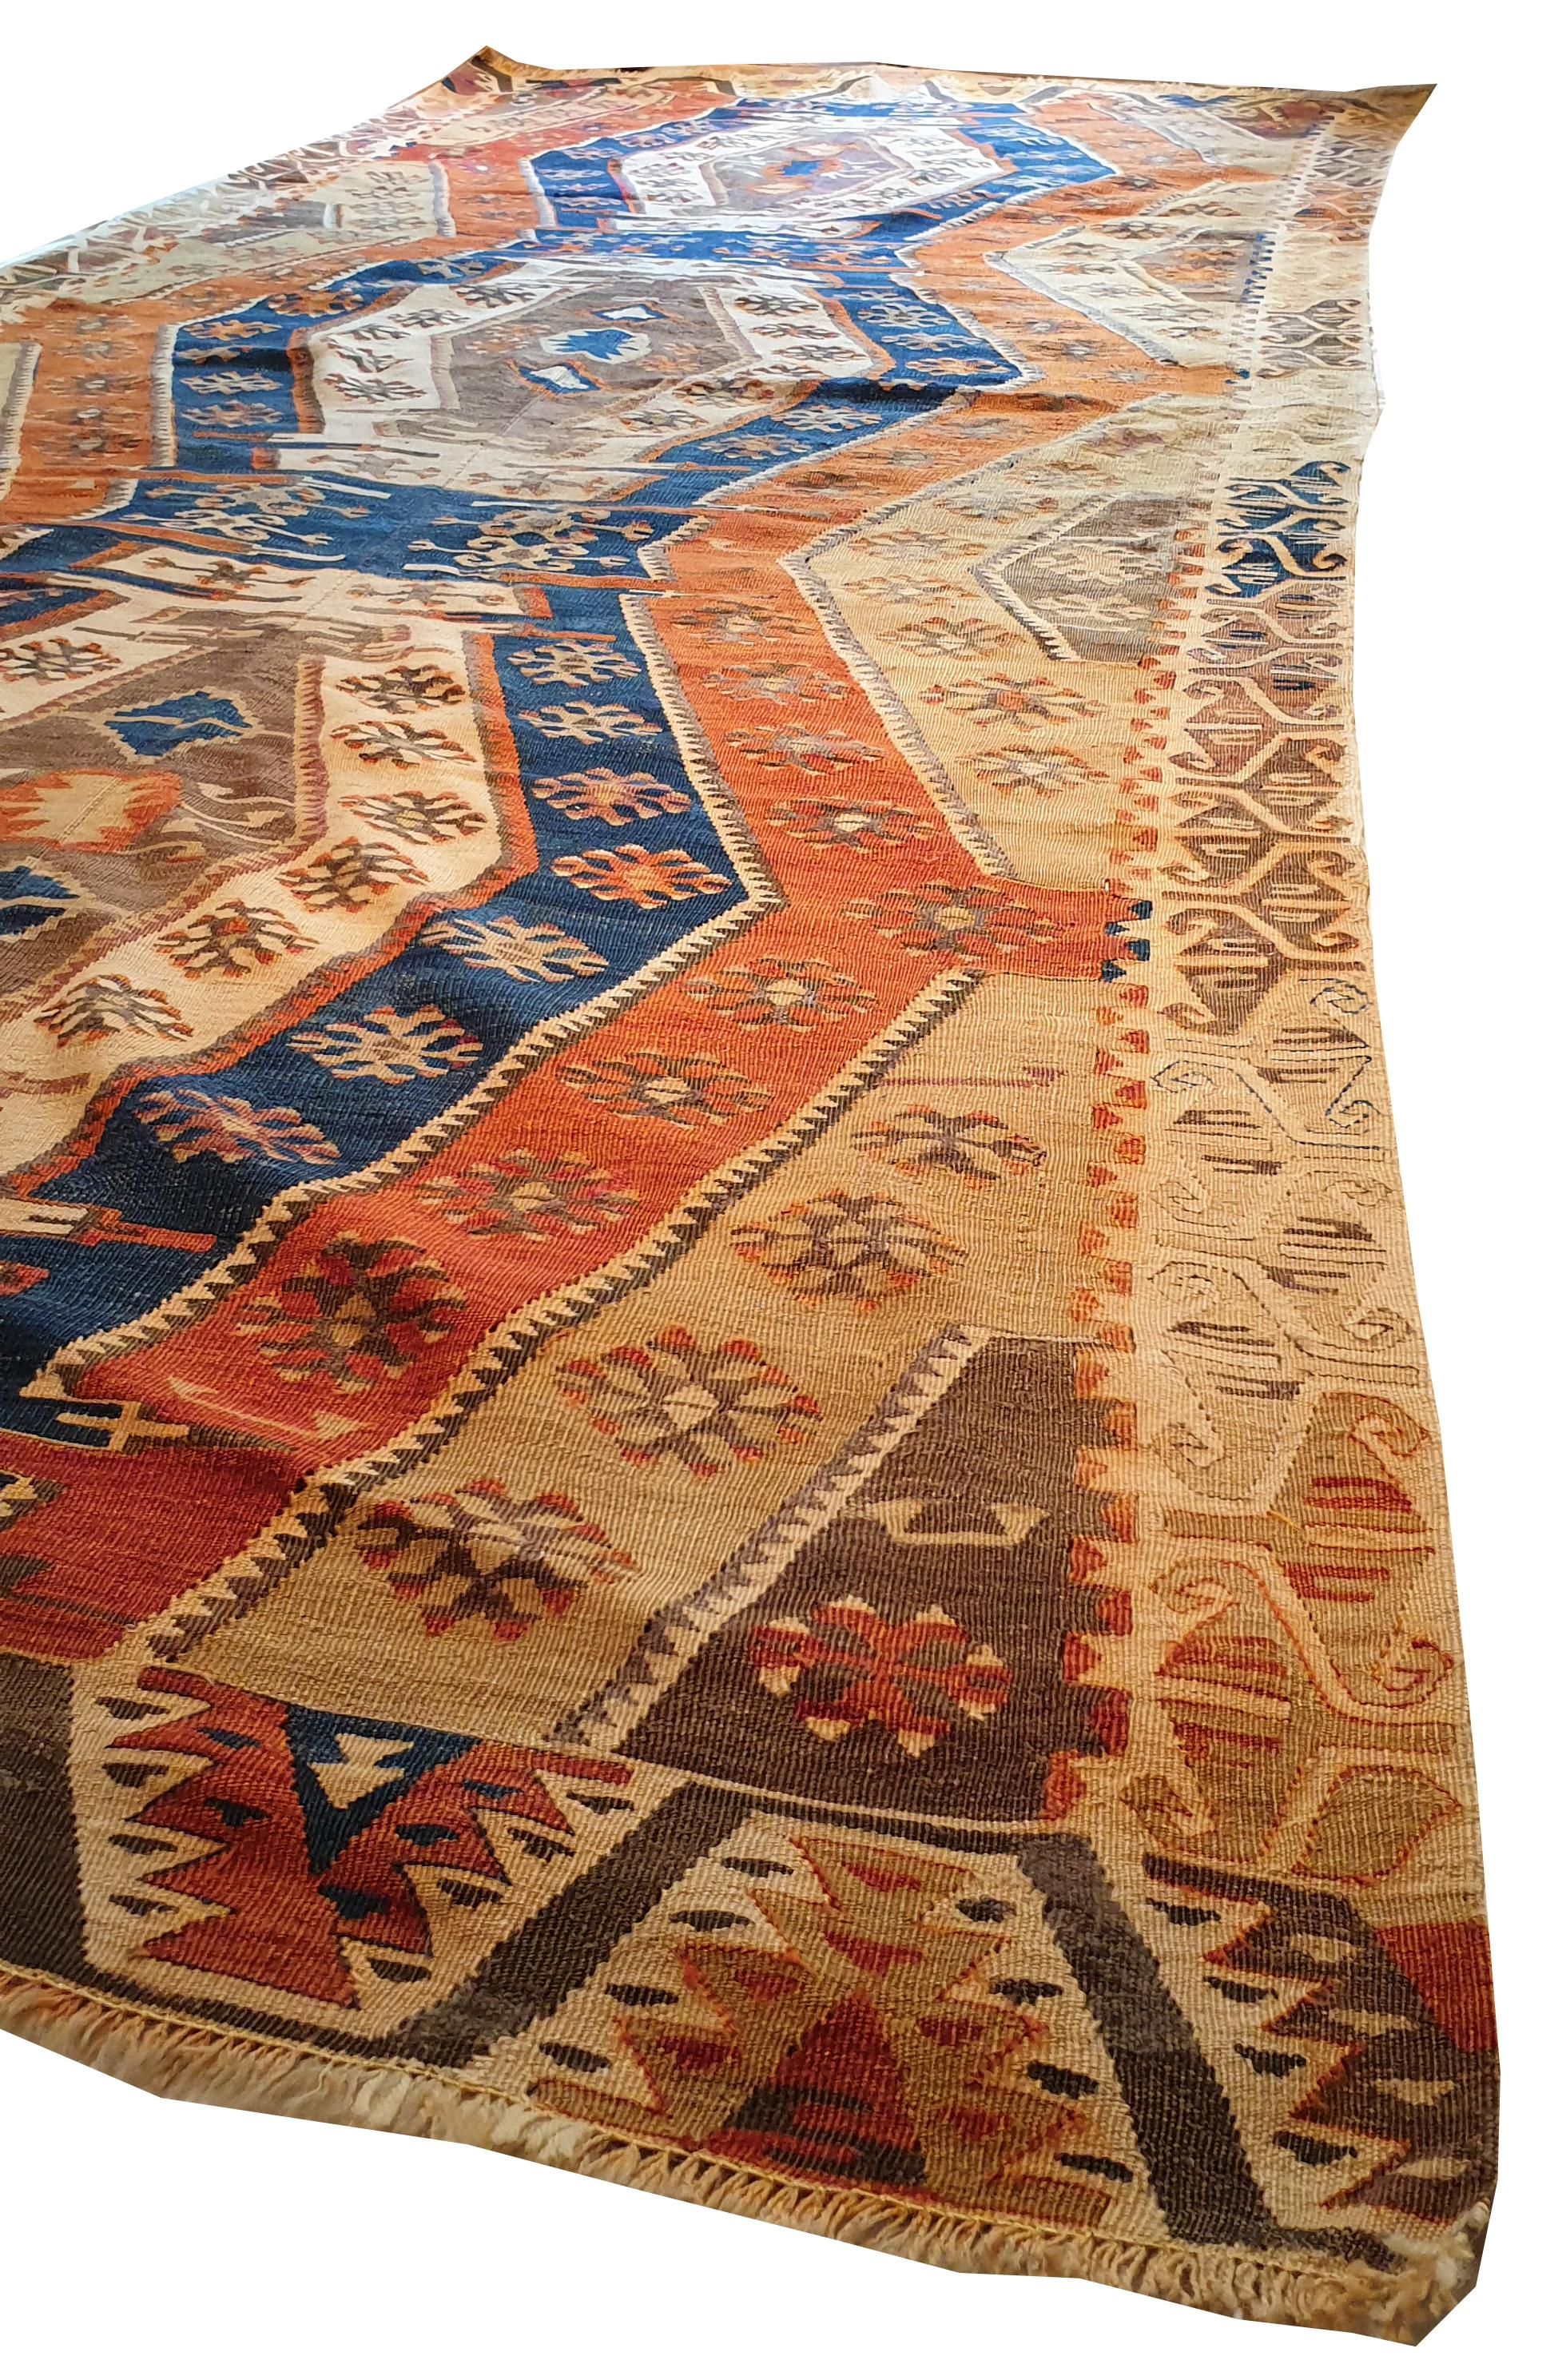 756 - Nice mid 19th century Turkish flat rug or Kilim, with geometric design and pretty colors with red, pink, orange, yellow, blue and gray, completely hand-woven with wool on wool.